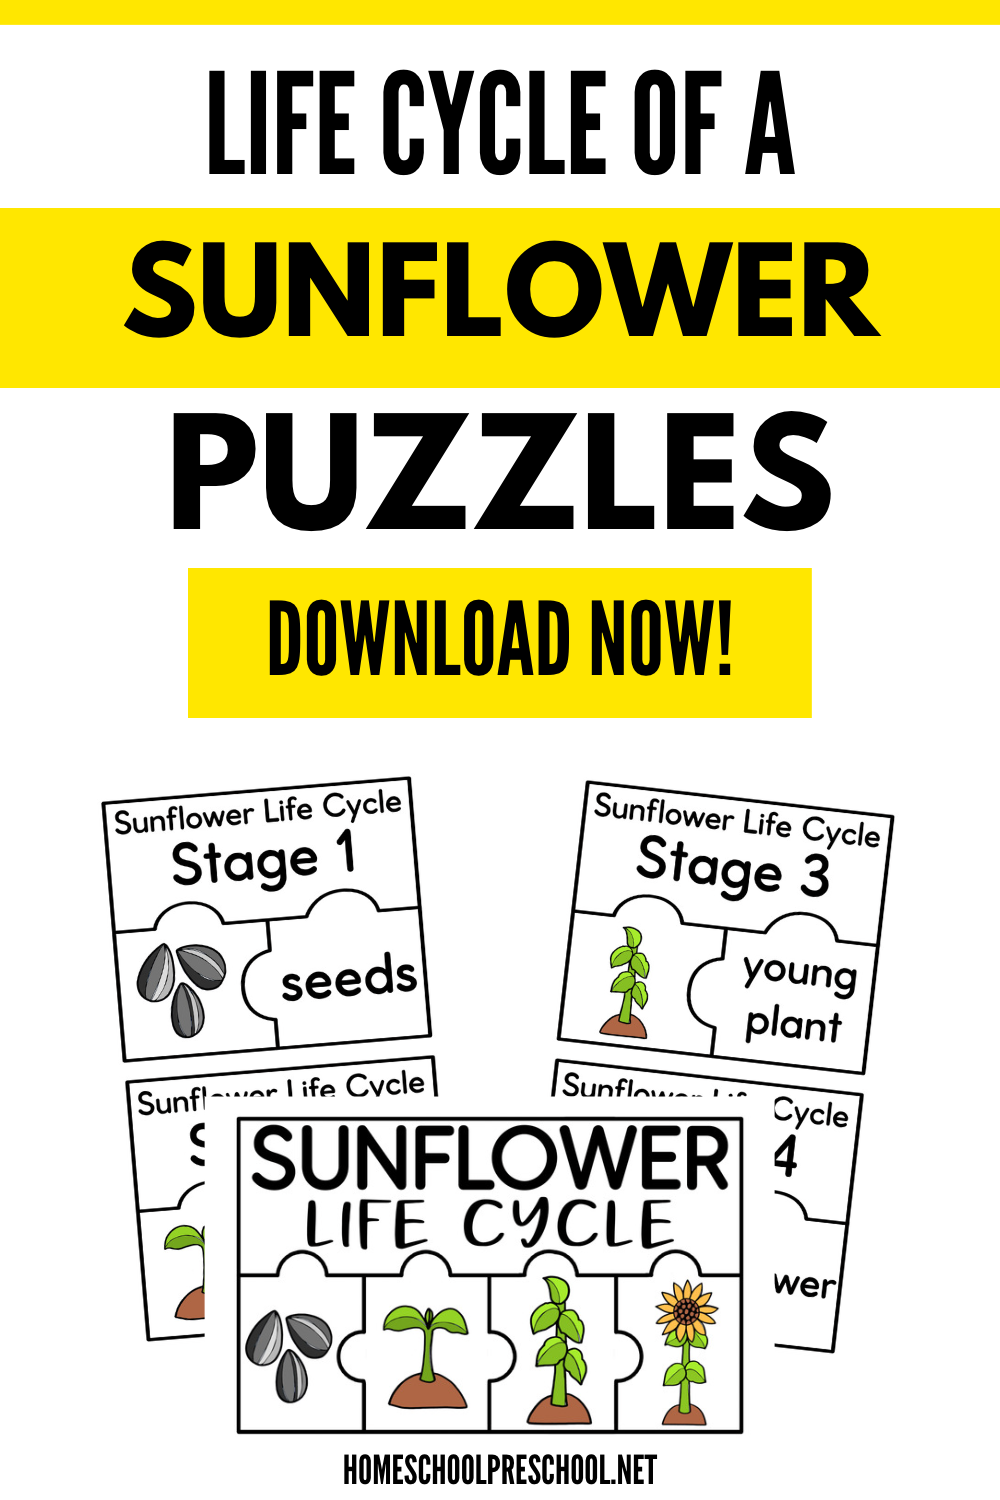 sunflower-life-cycle-puzzles Sunflower Life Cycle Activity